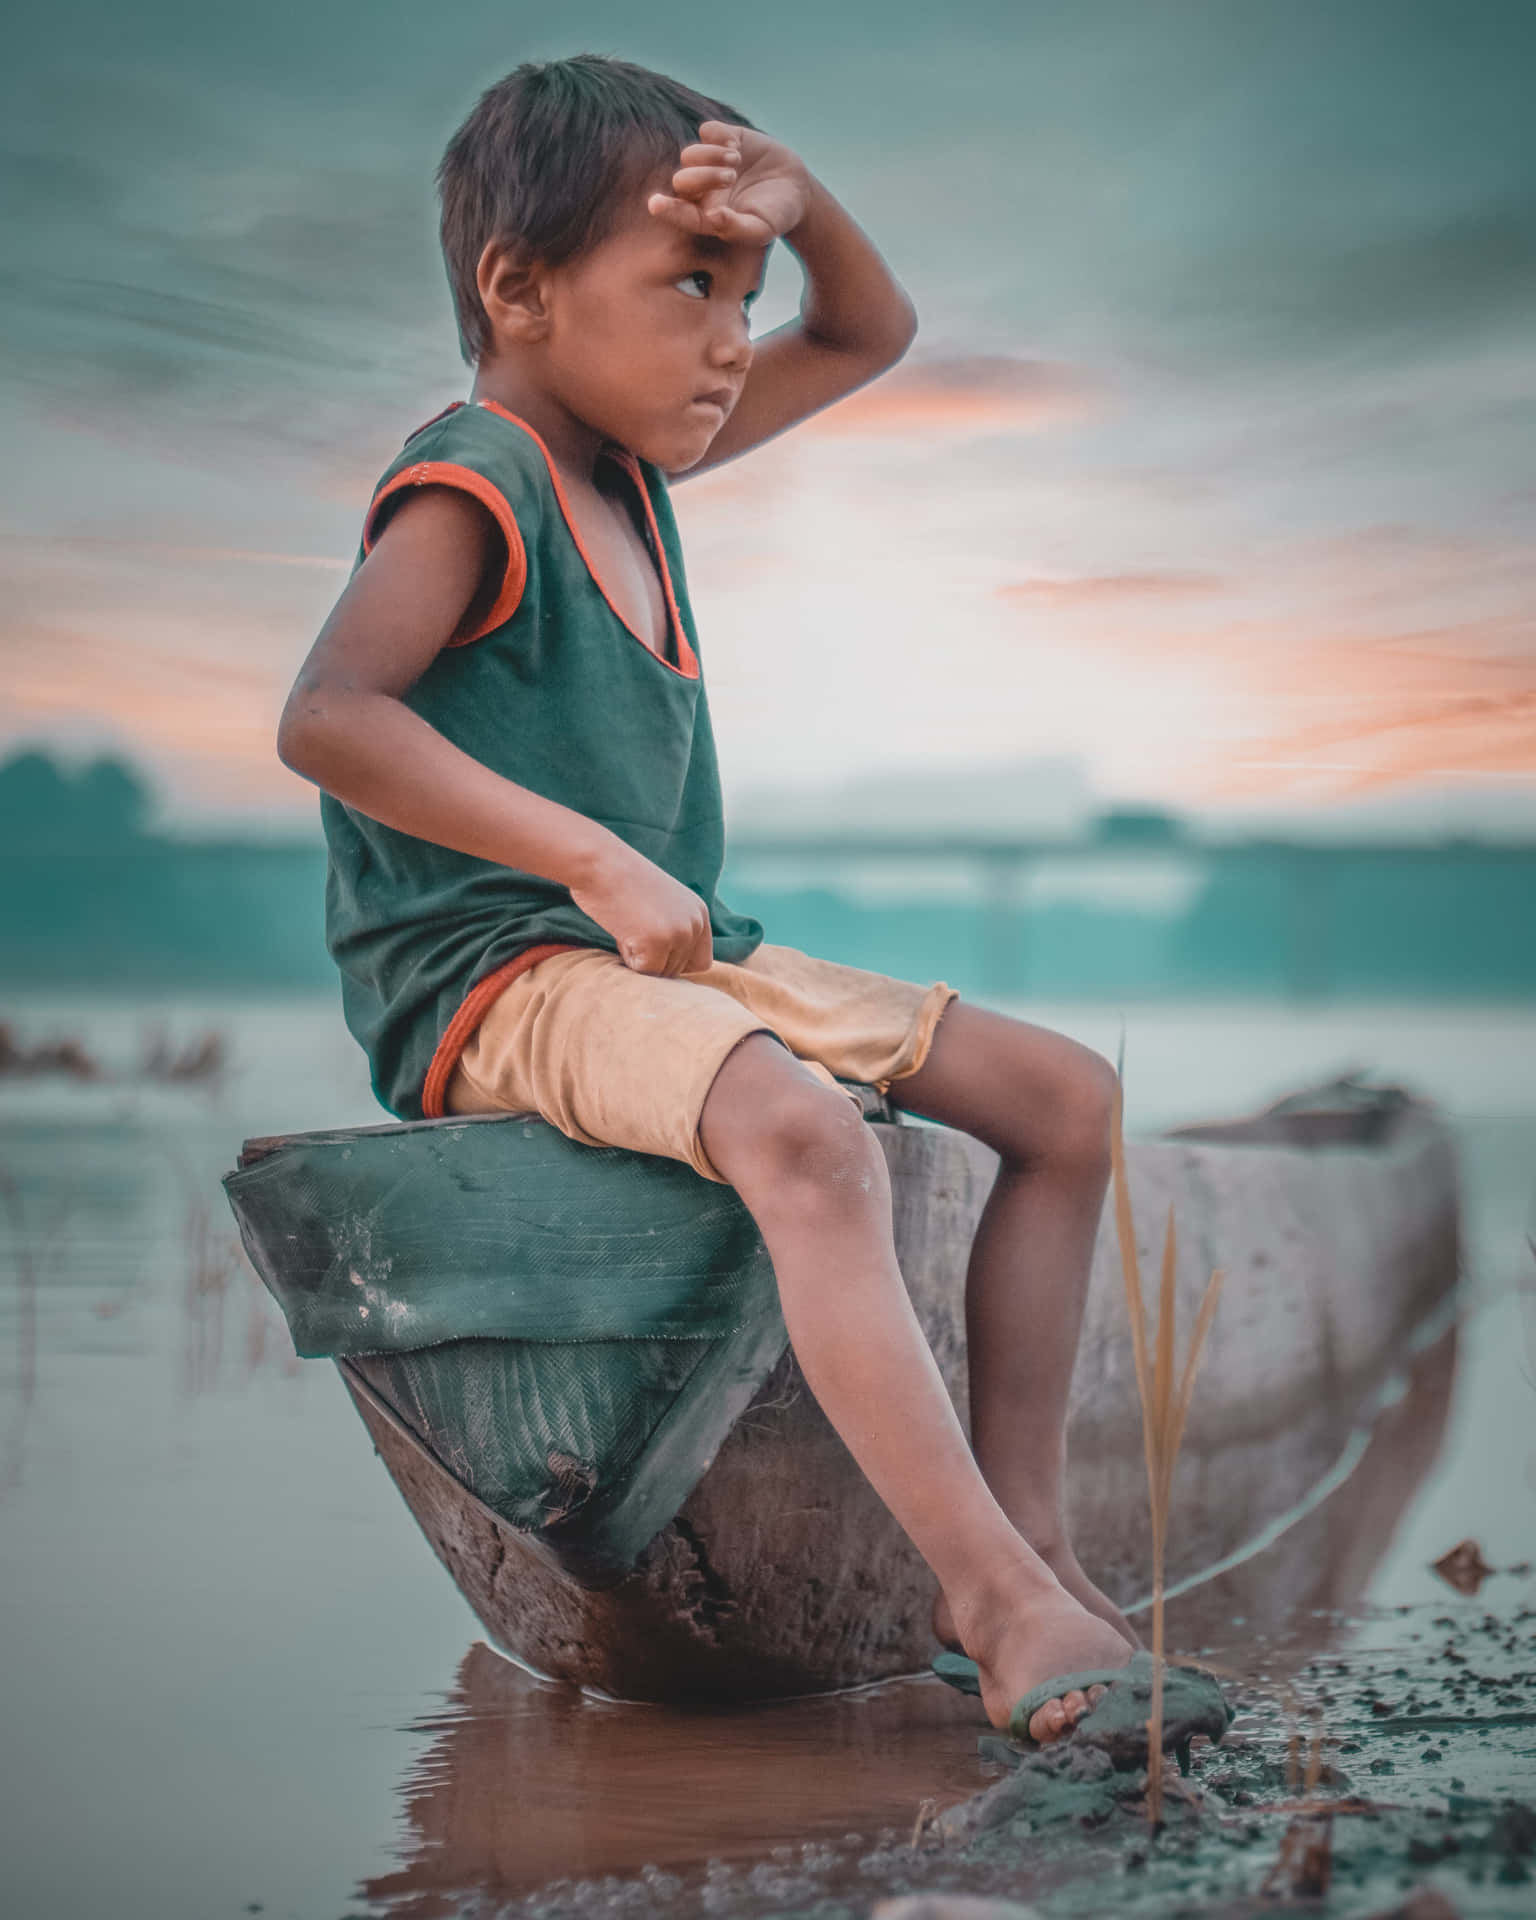 Inadequate Kid In Old Boat Wallpaper